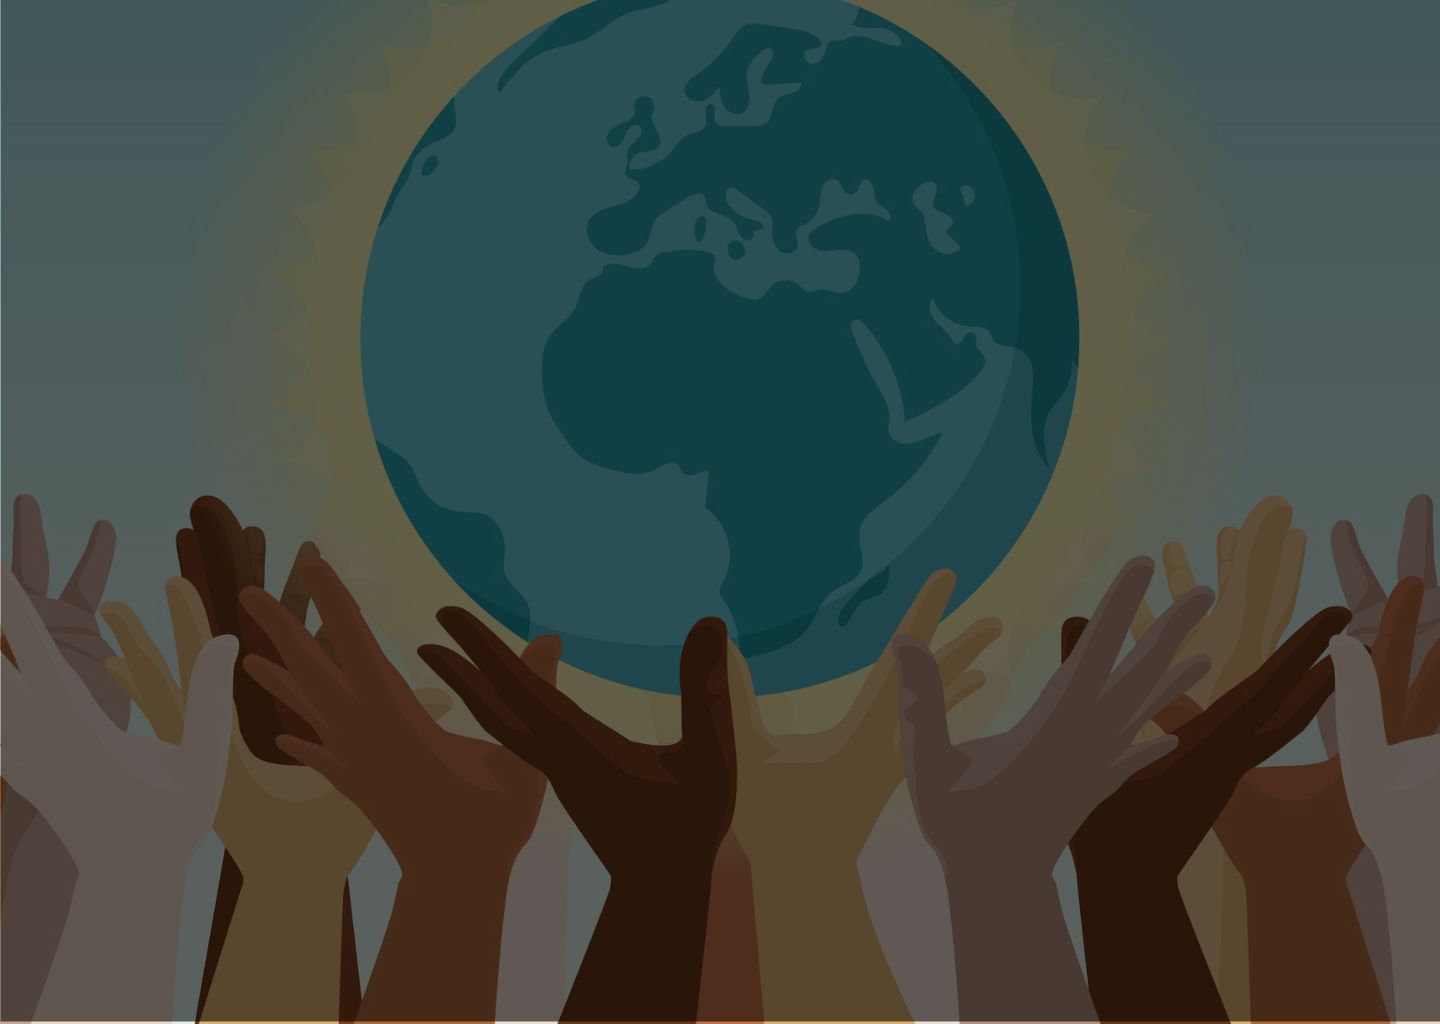 Hands reaching up to the earth, representing a global movement towards peace.